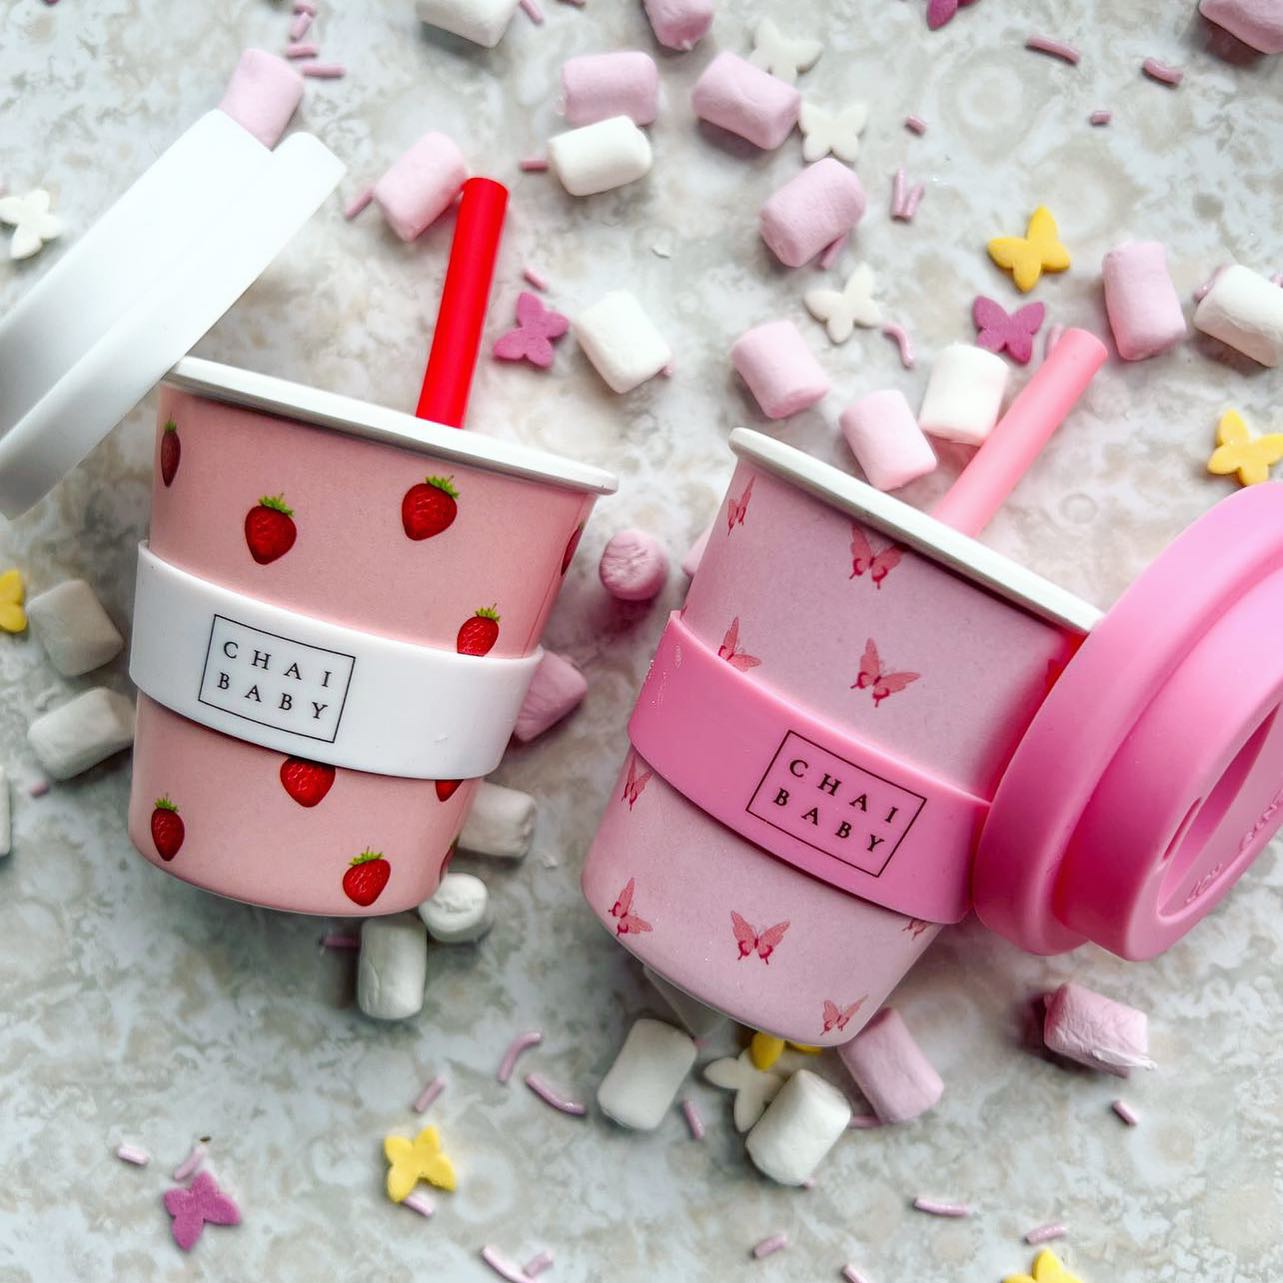 Babyccino Cup - Brave Butterfly